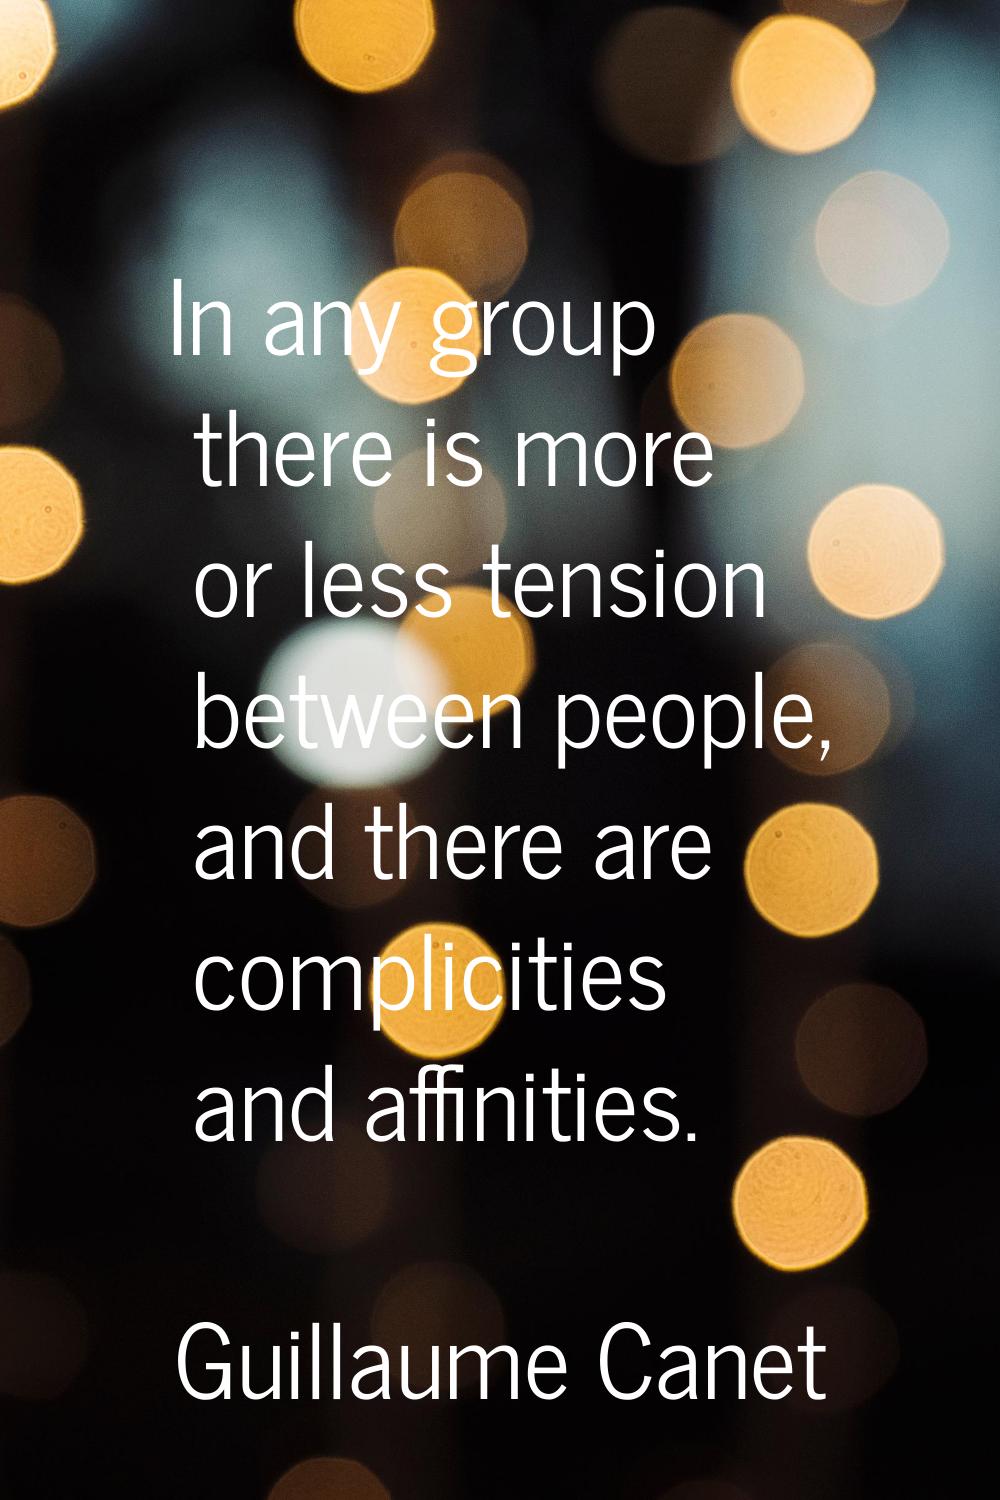 In any group there is more or less tension between people, and there are complicities and affinitie